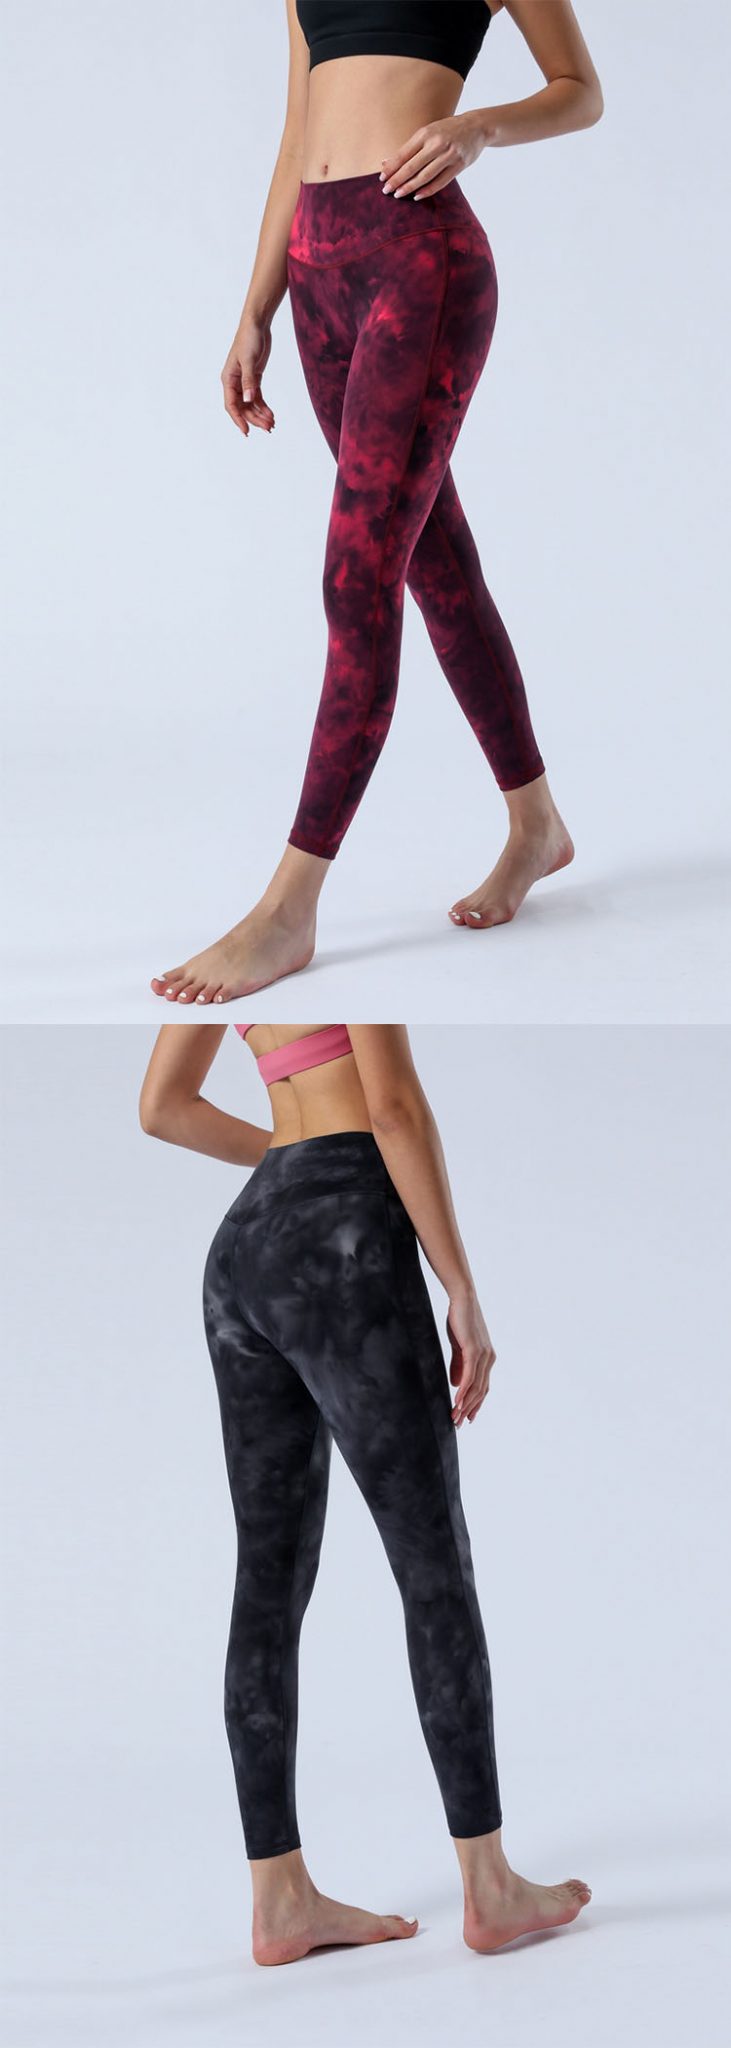 Gym Leggings Without Front Seamstress